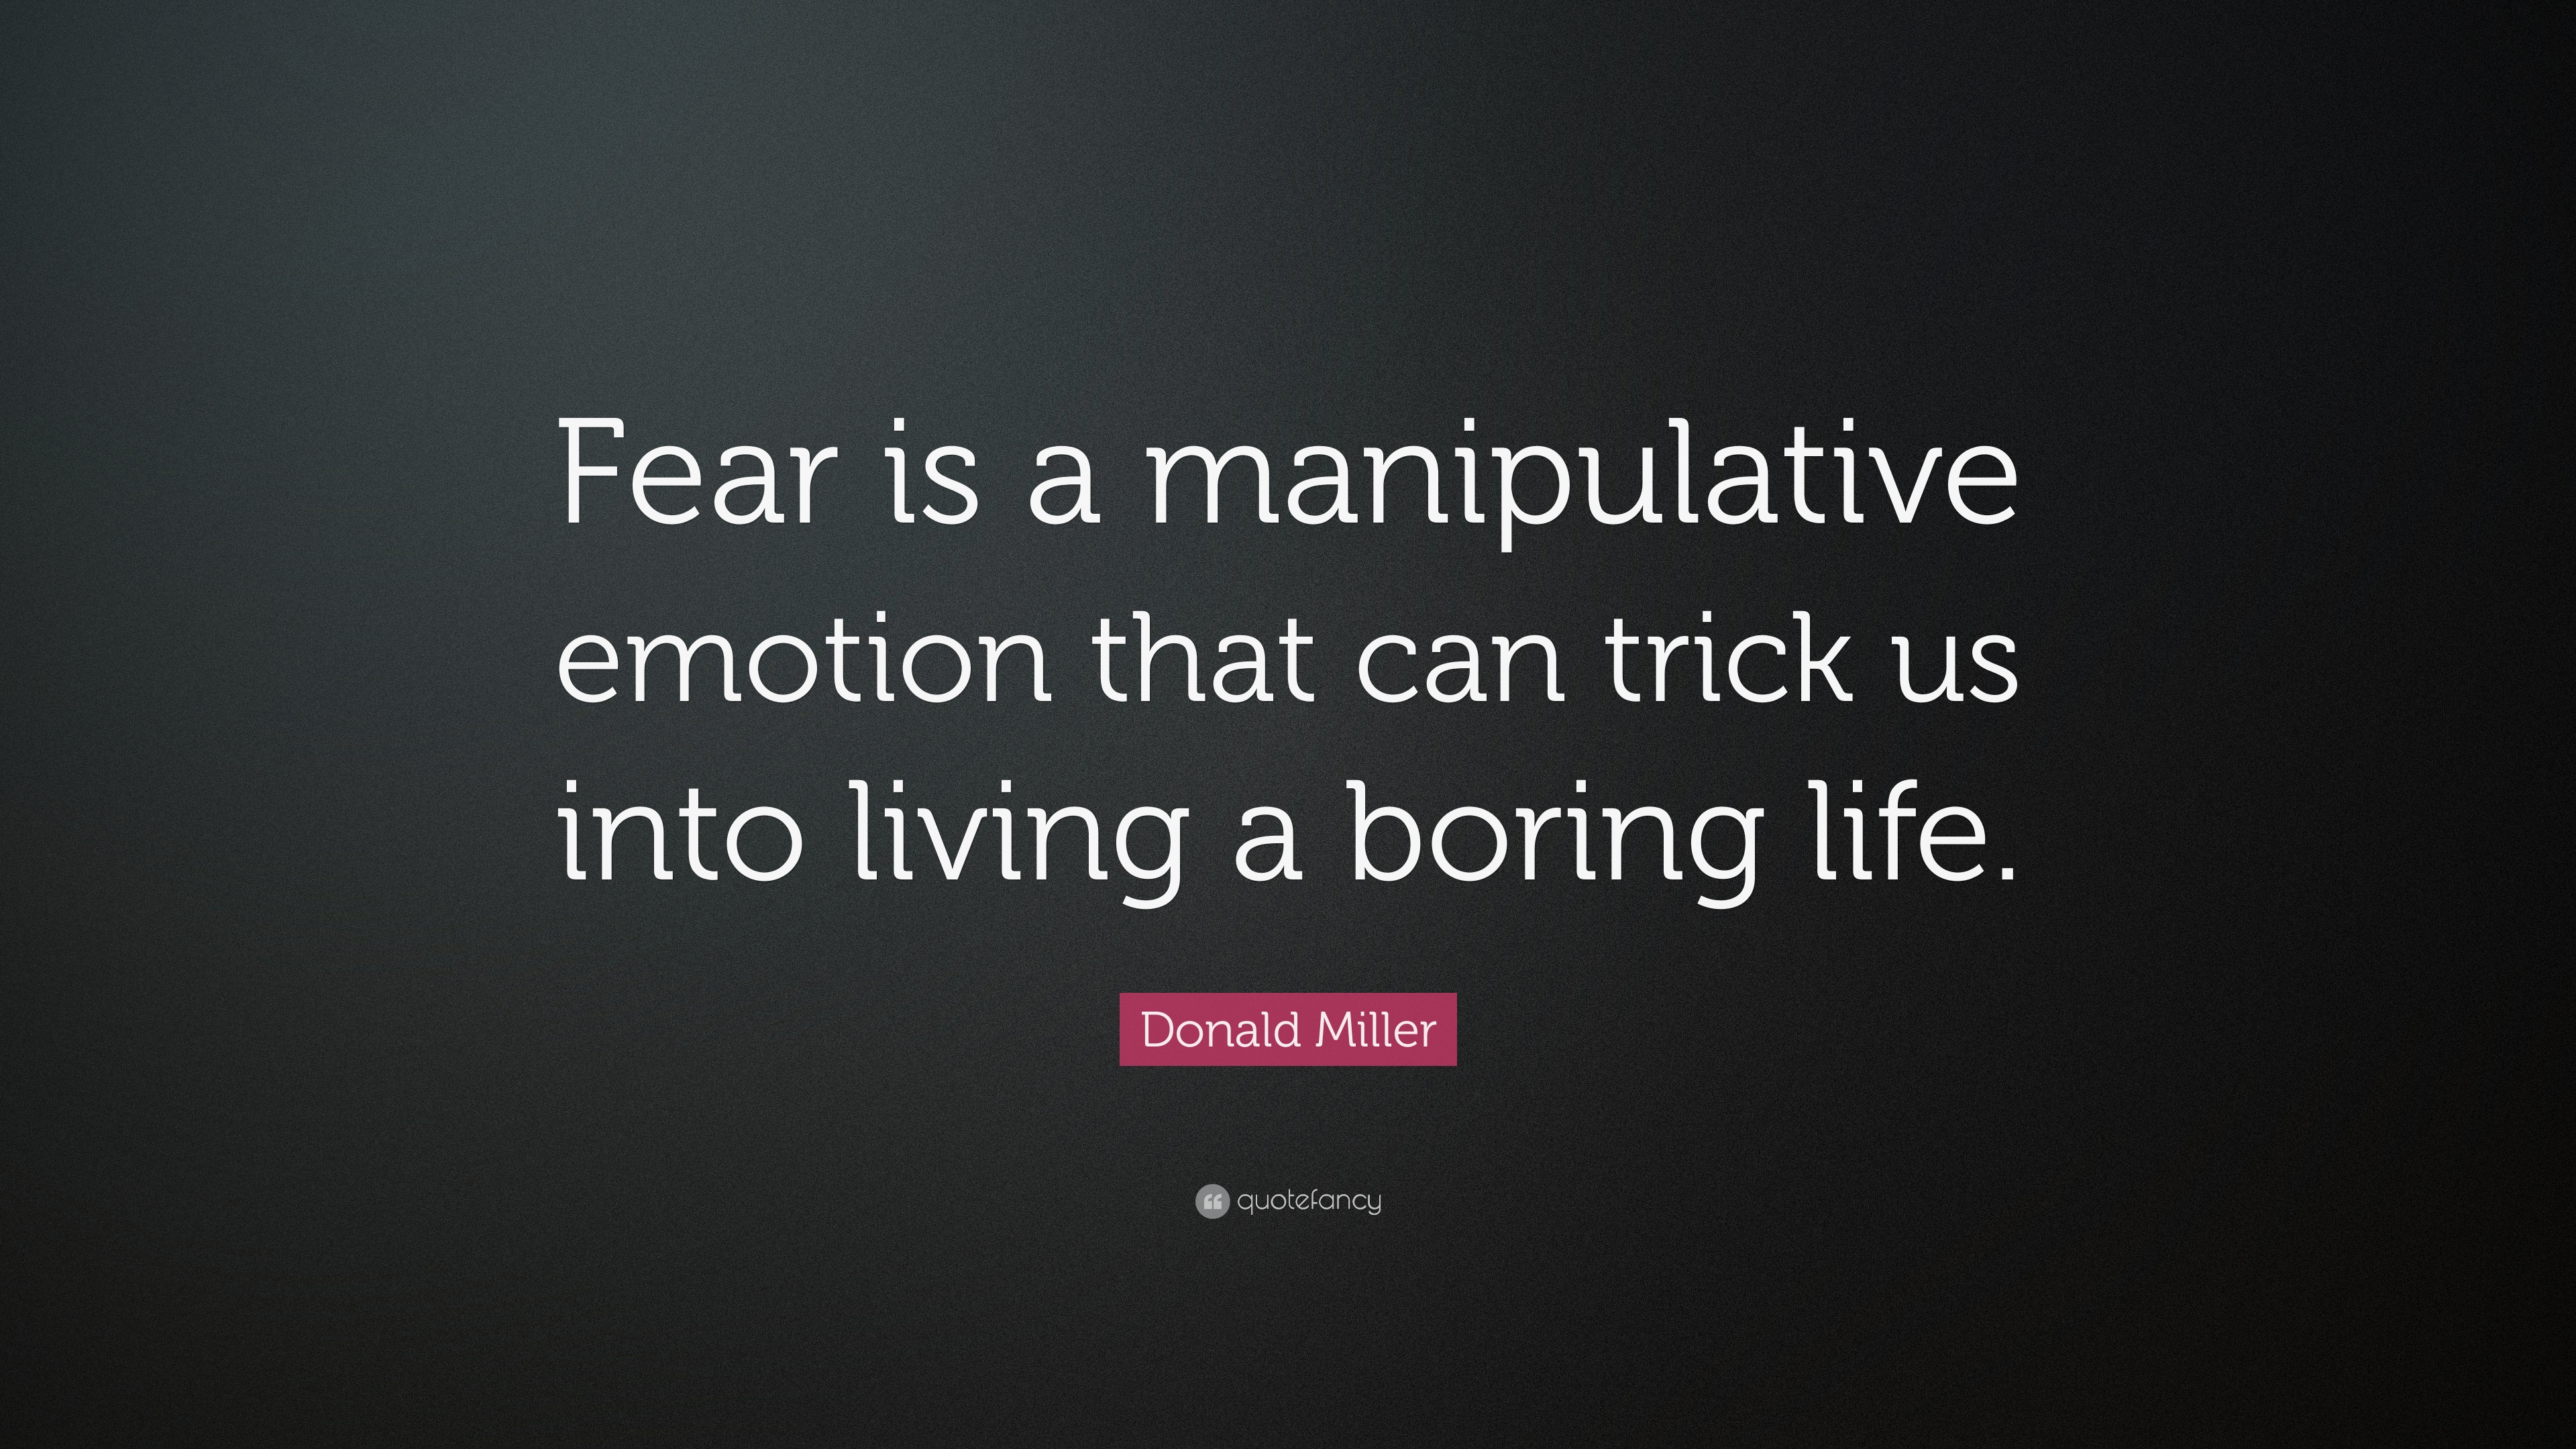 Donald Miller Quote: “Fear is a manipulative emotion that can ...